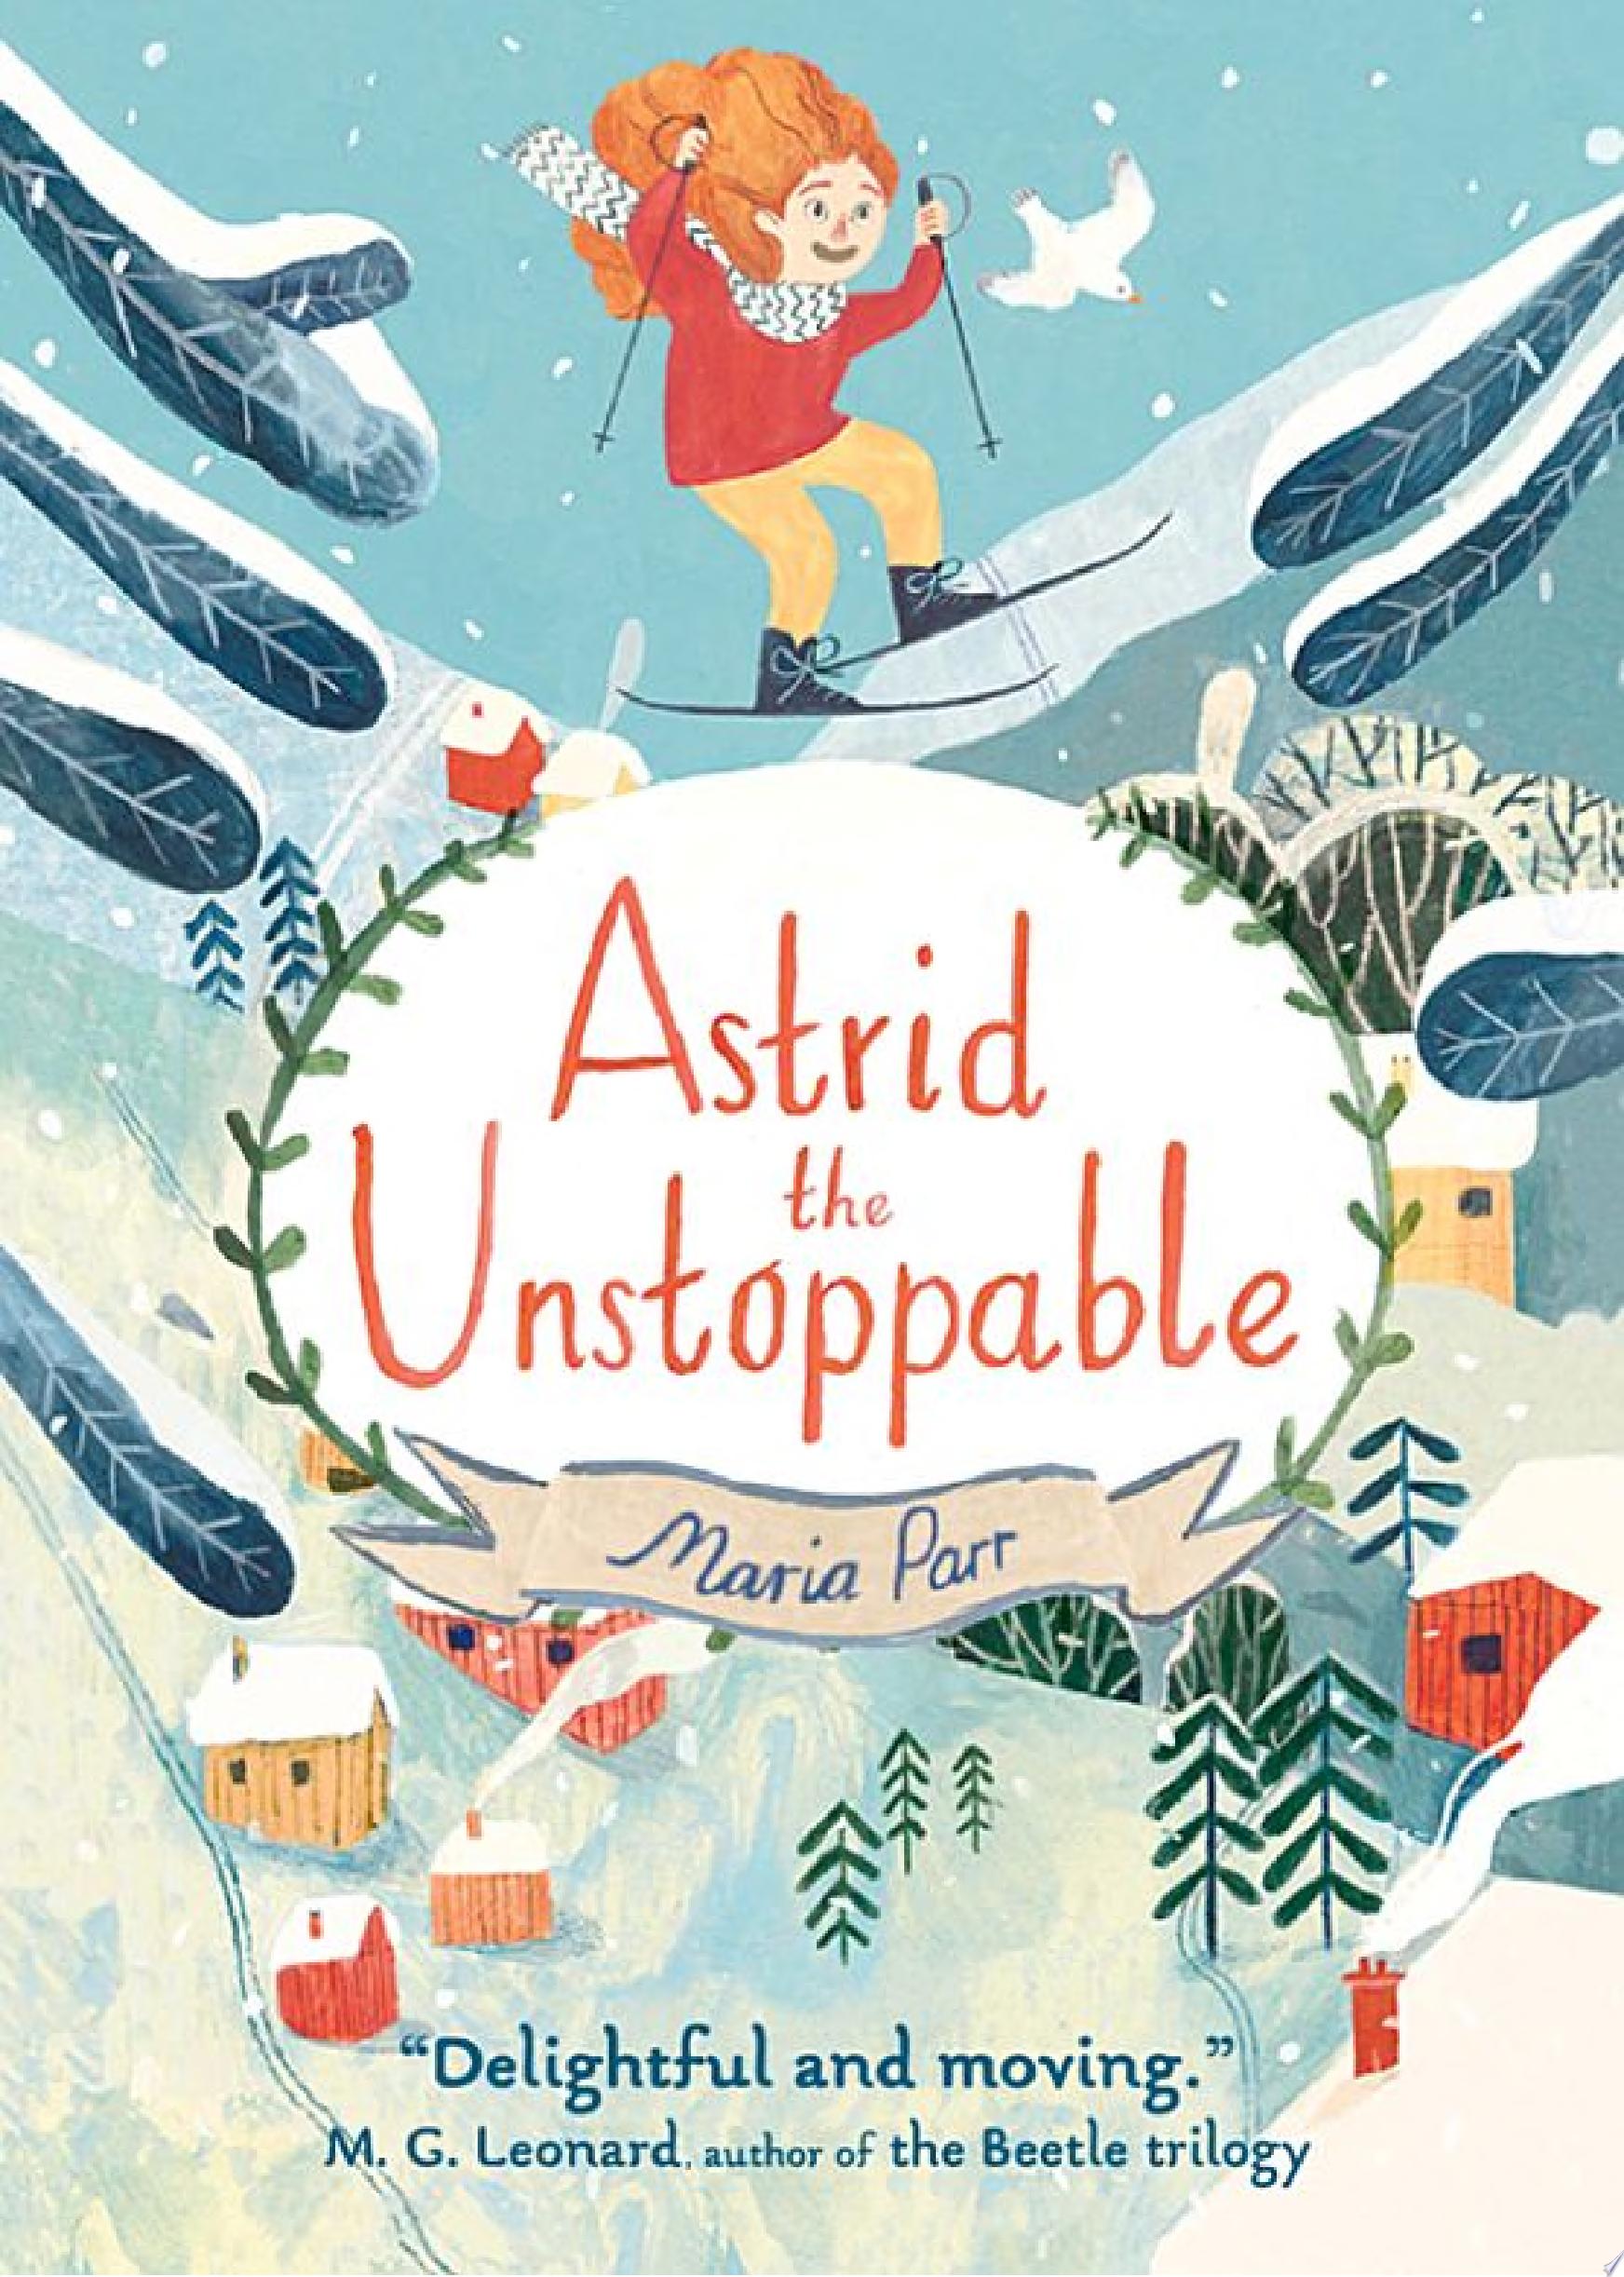 Image for "Astrid the Unstoppable"